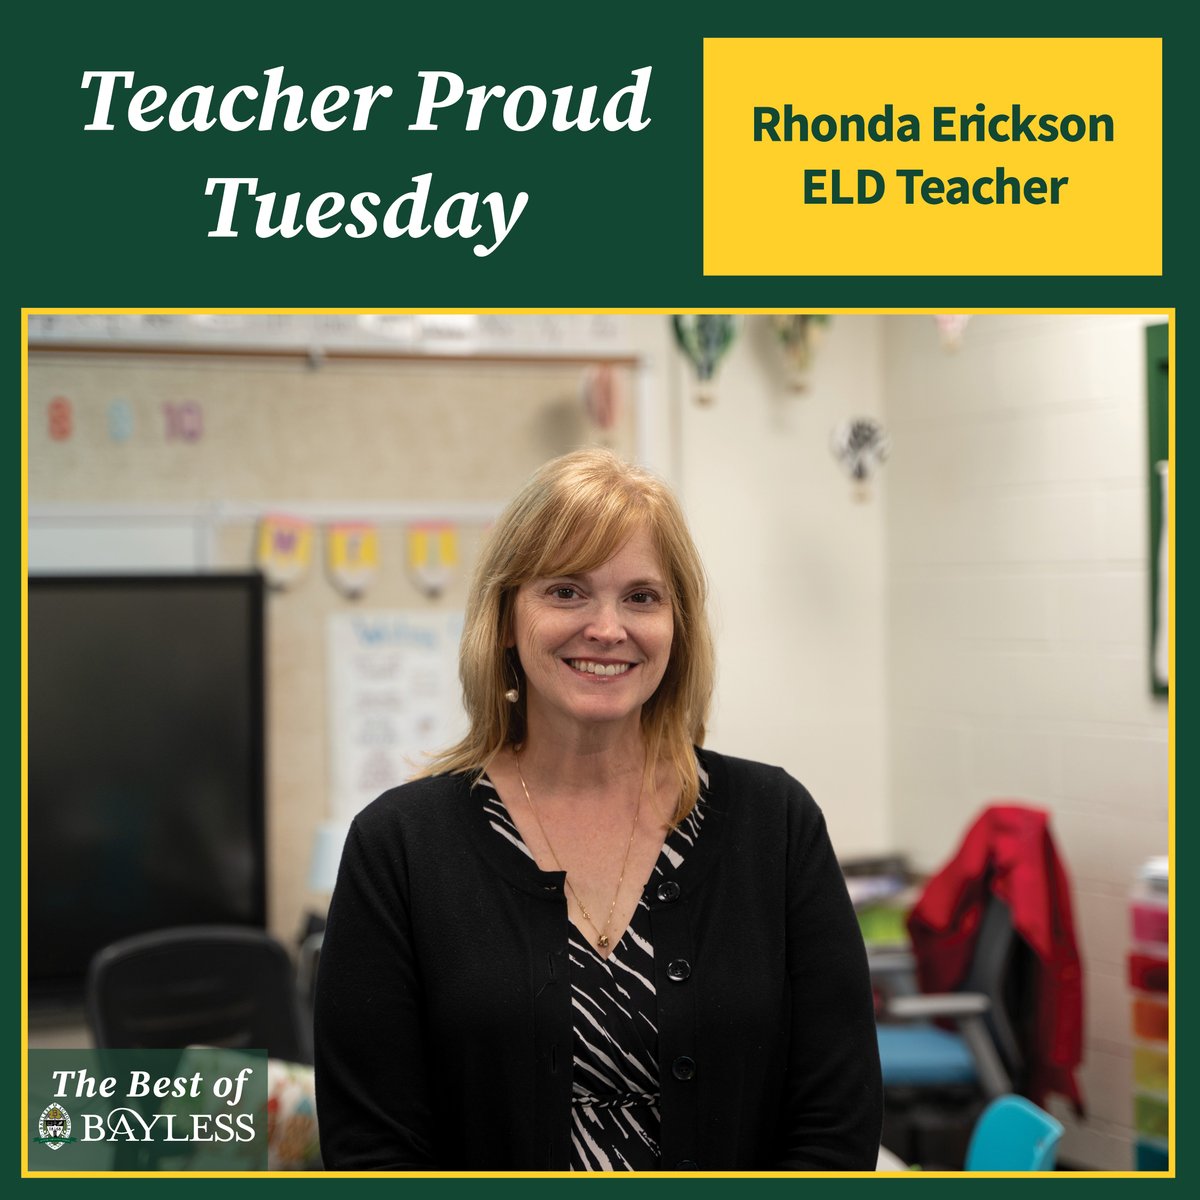 This #TeacherProudTuesday is for ELD Teacher Rhonda Erickson! Ms. Erickson is a dedicated teacher who has developed several procedures for newcomers and their families, which have made the transition into Bayless and the United States easier.

Thank you, Ms. Erickson!